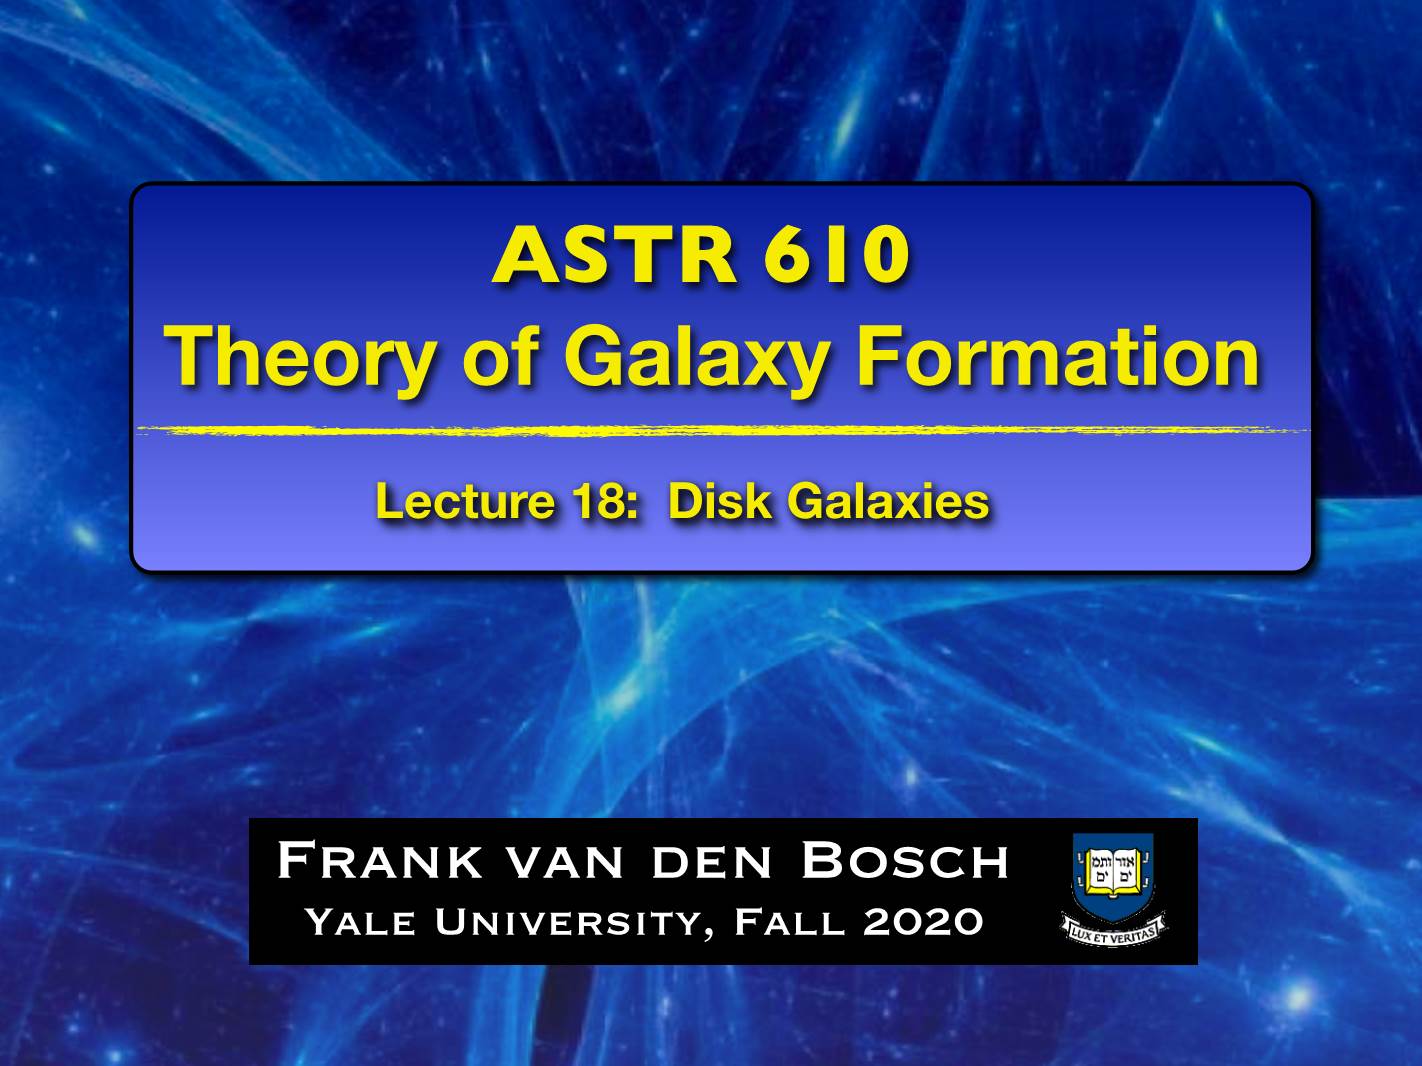 Lecture 18: Disk Galaxies